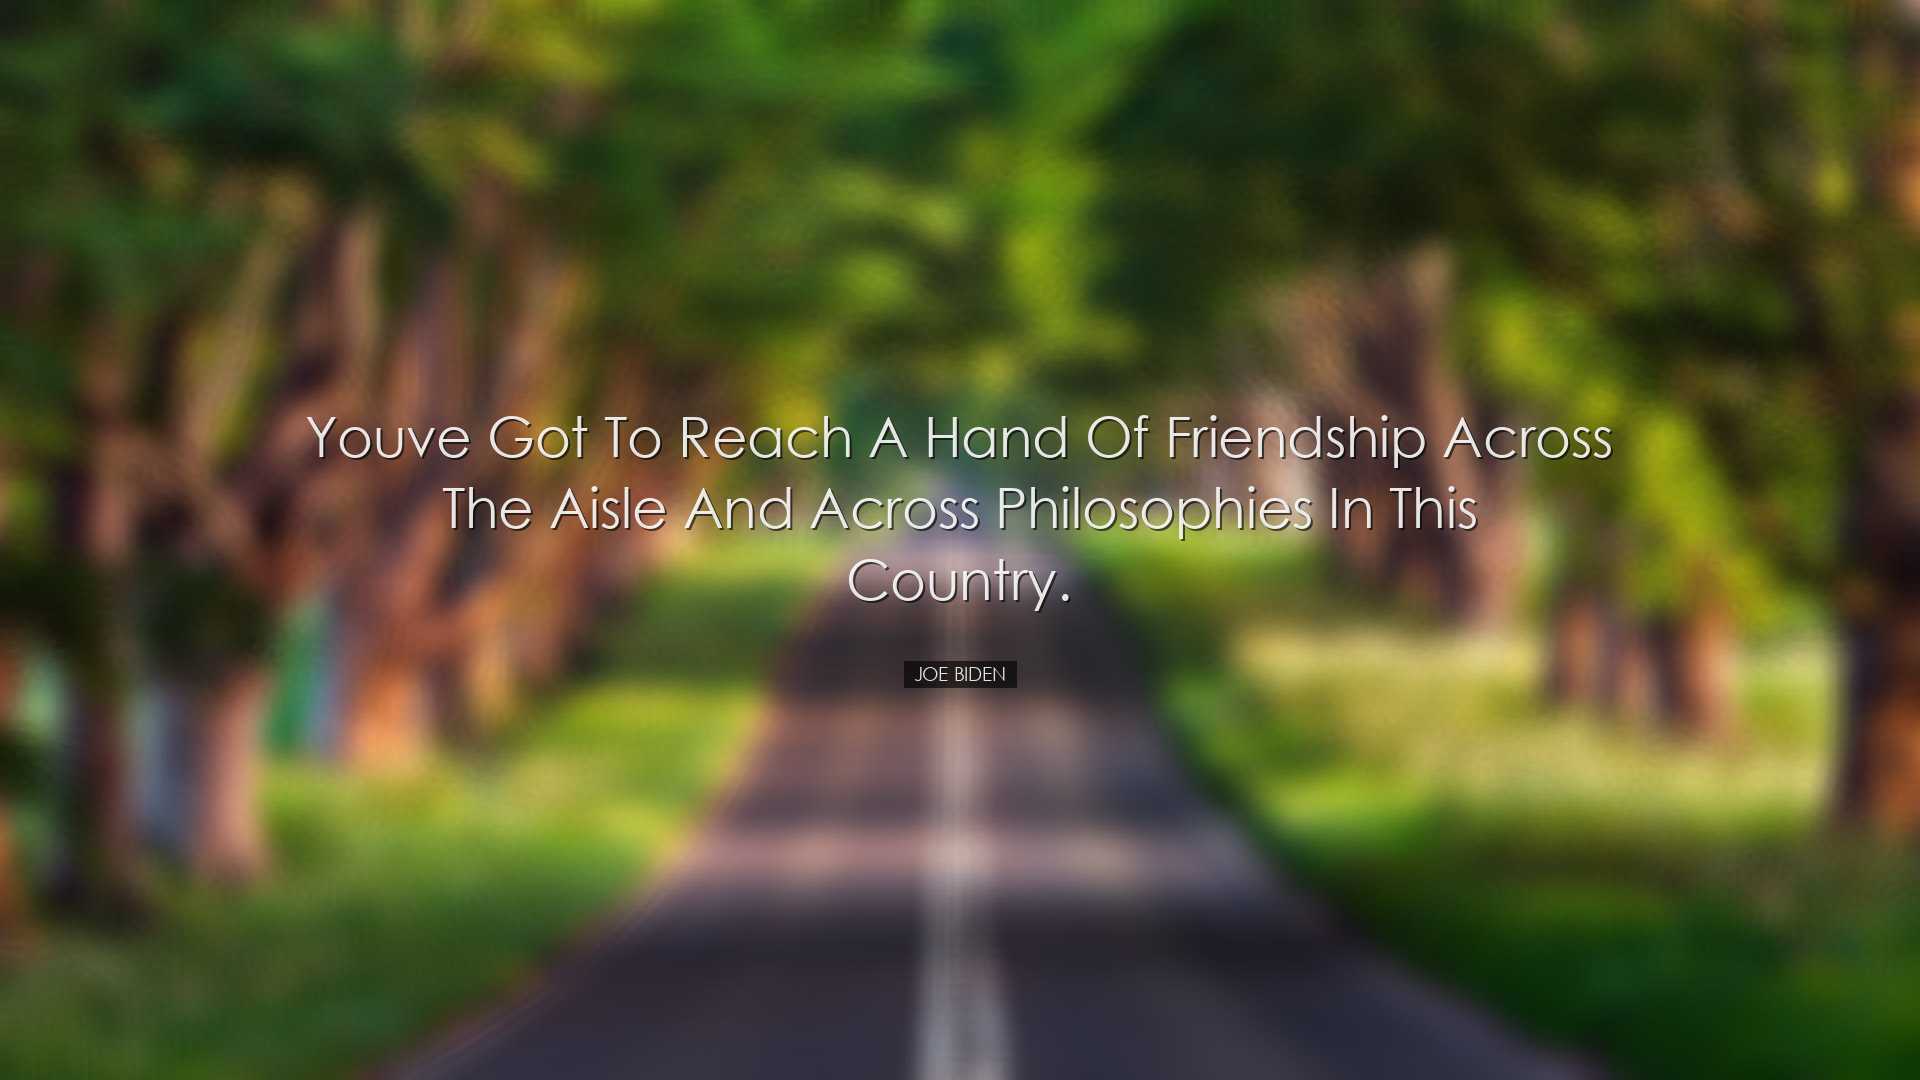 Youve got to reach a hand of friendship across the aisle and acros